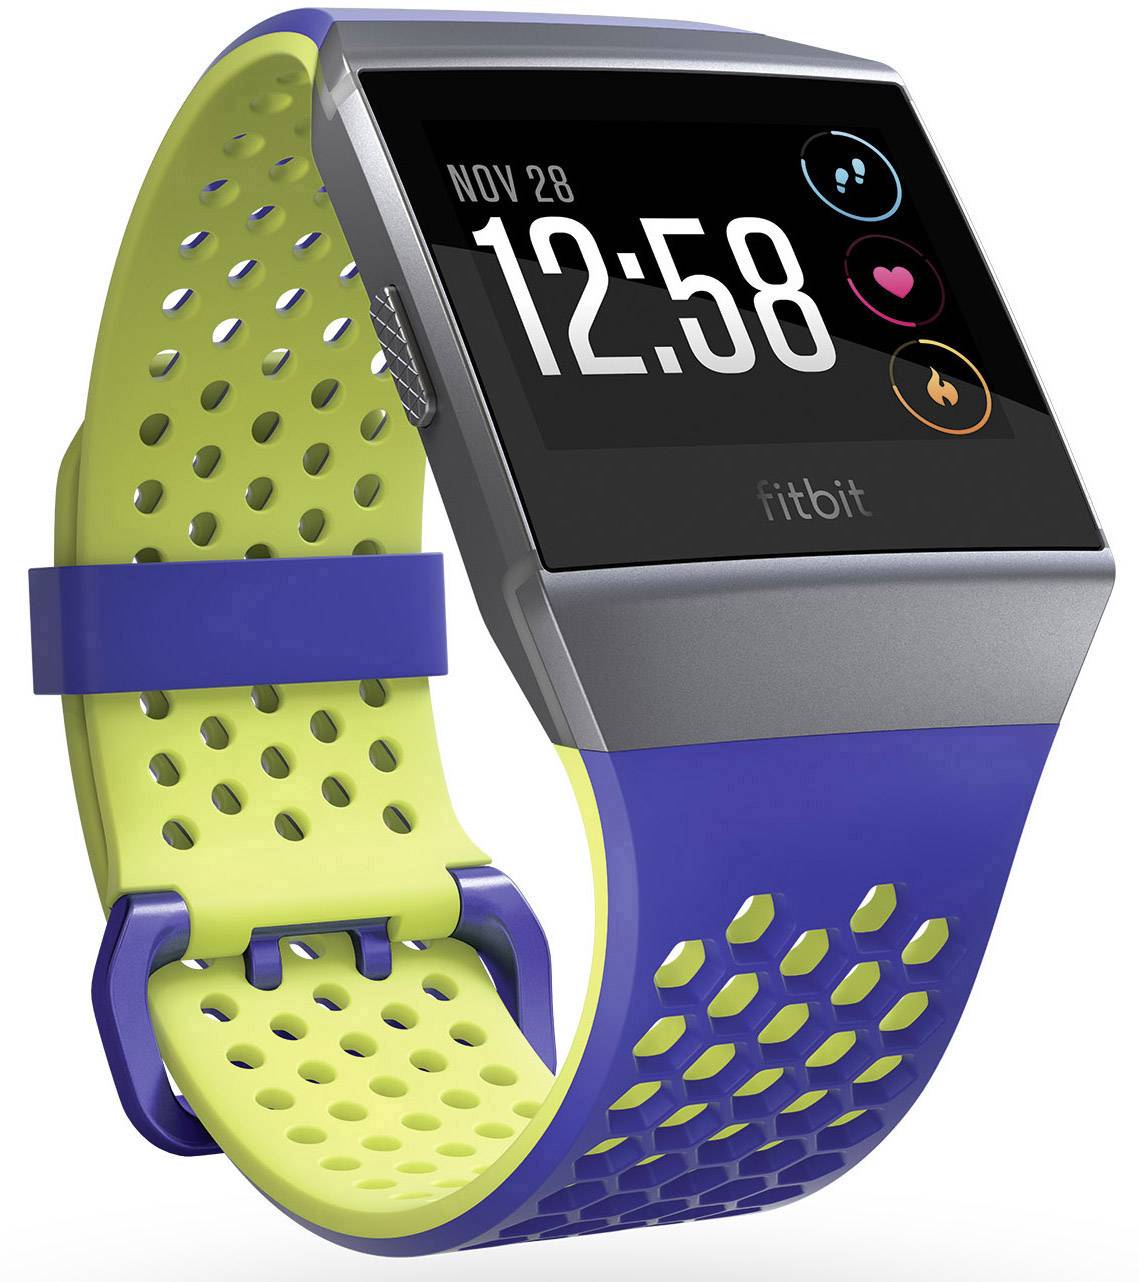 fitbit ionic sports strap